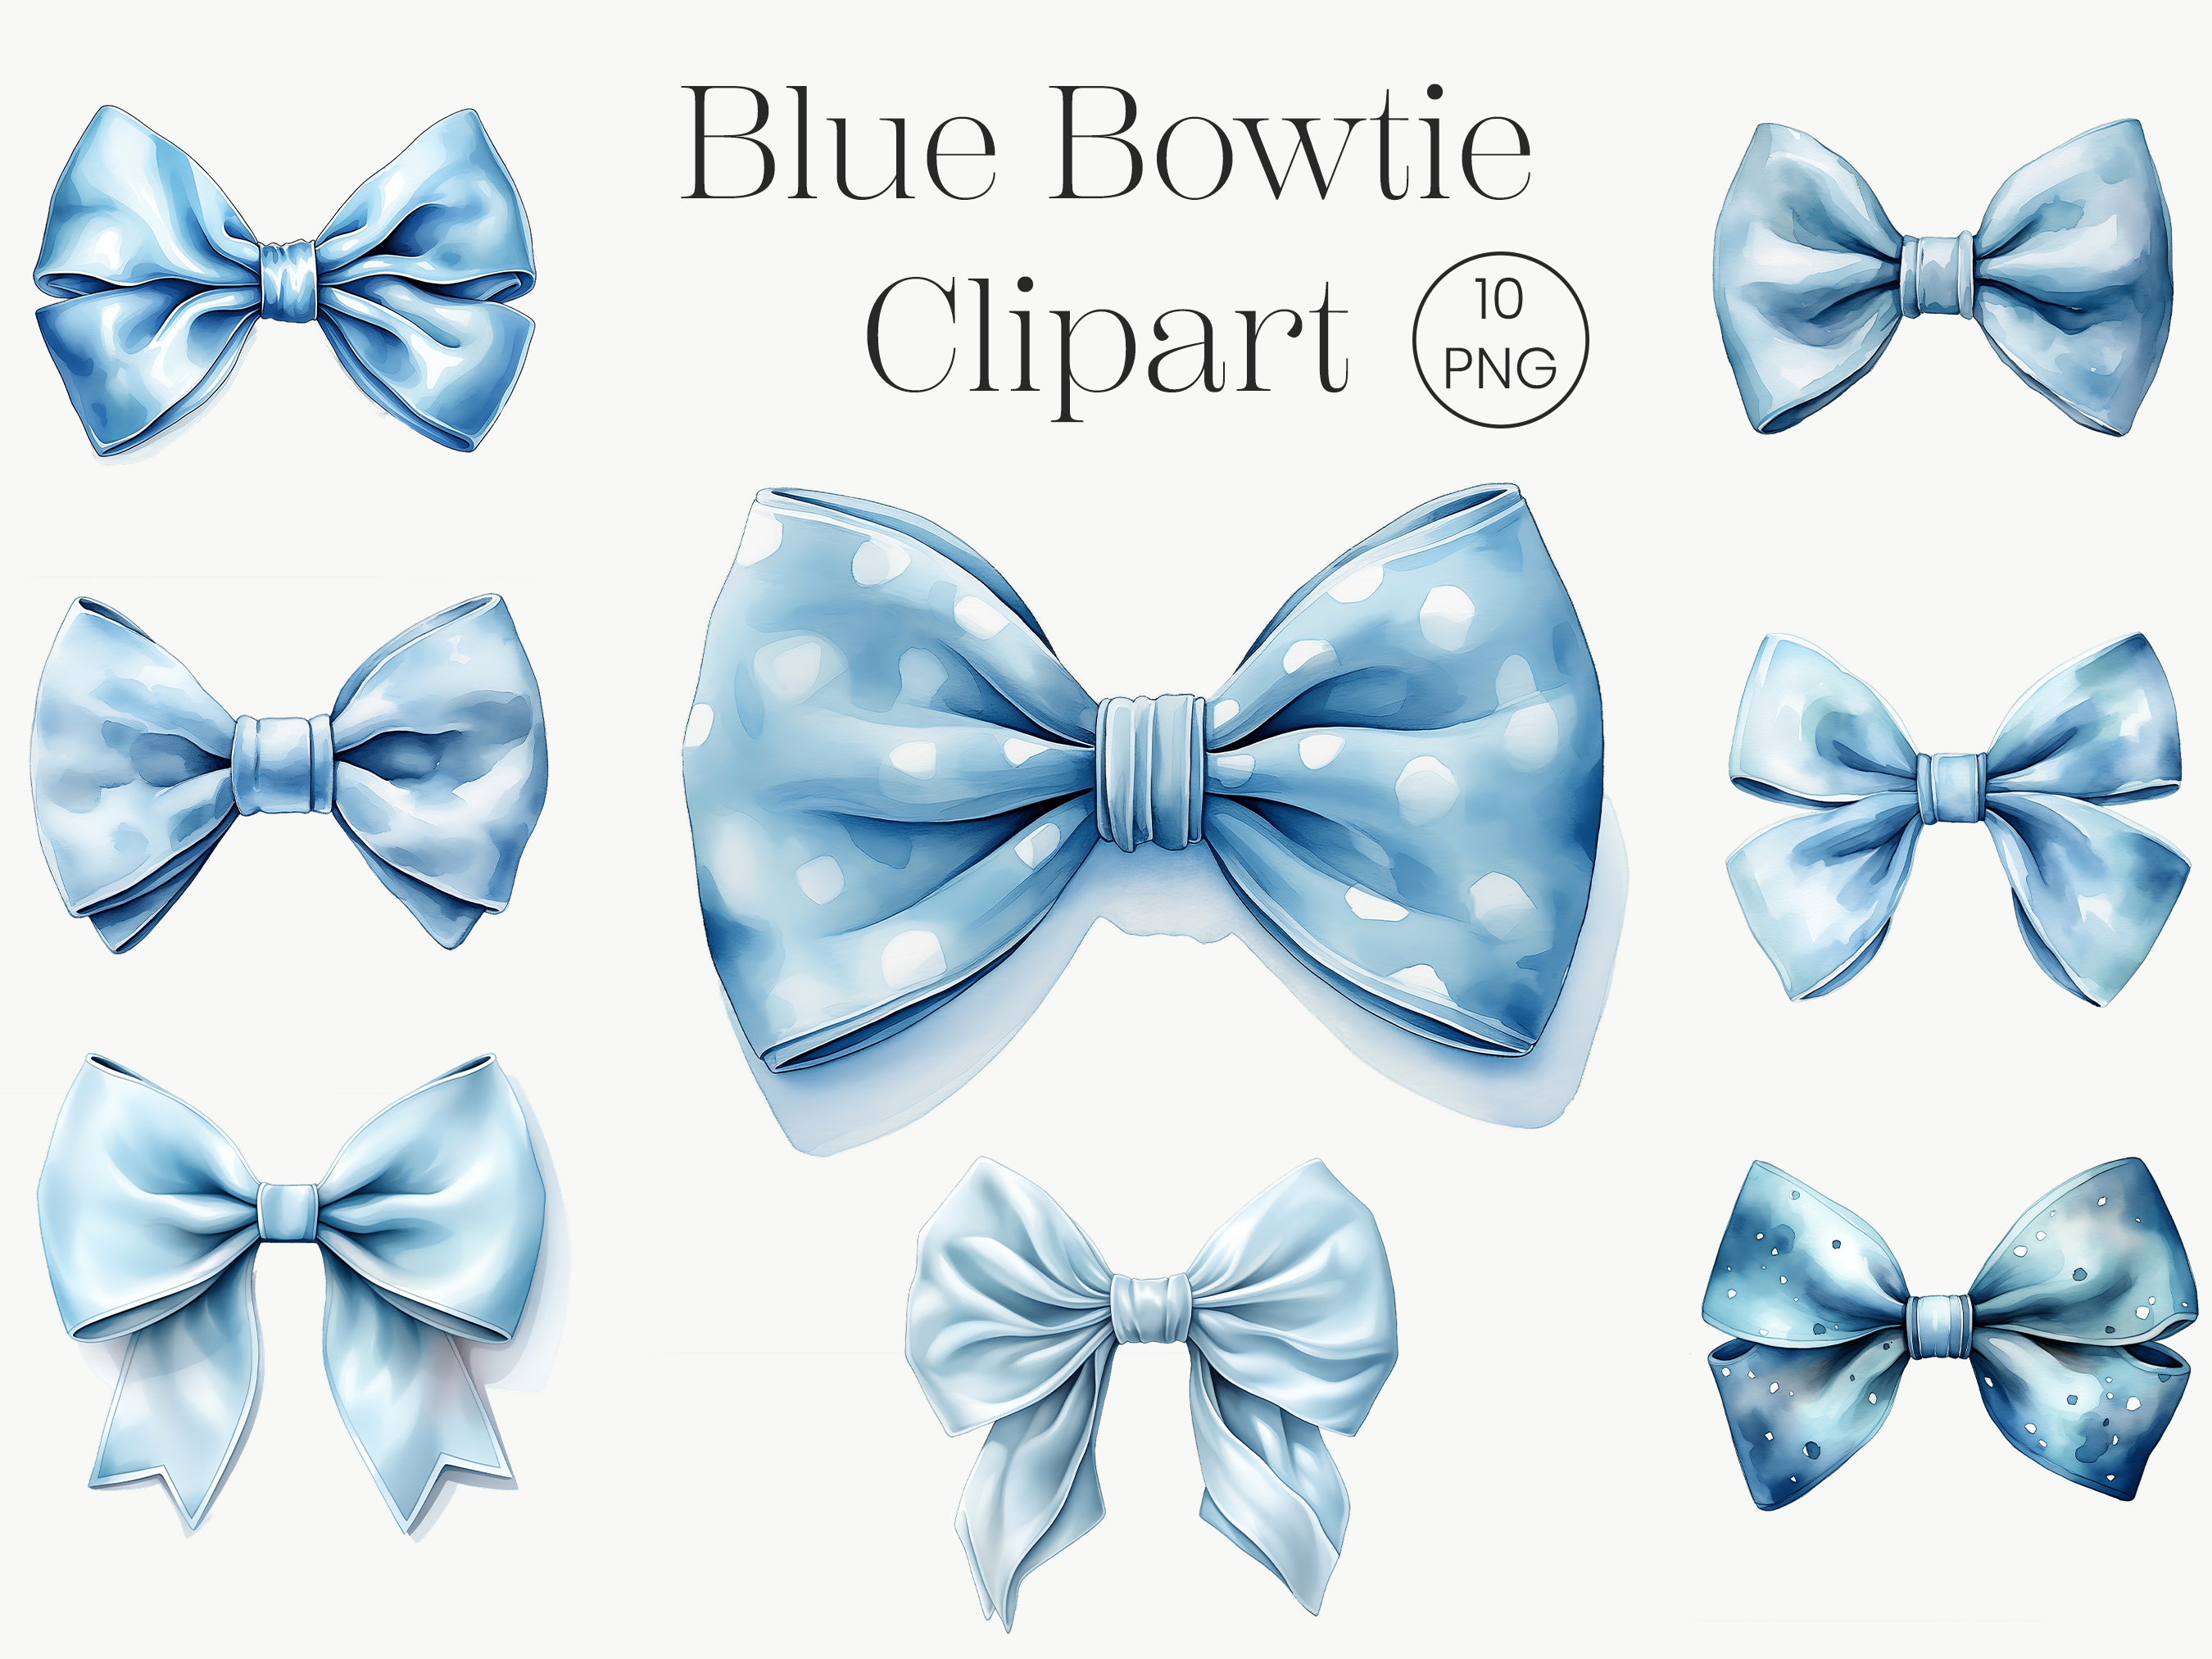 Midnight Blue and Sunglow Bow Tie clipart, digital clip art, printable,  commercial use - Instant Download - M266